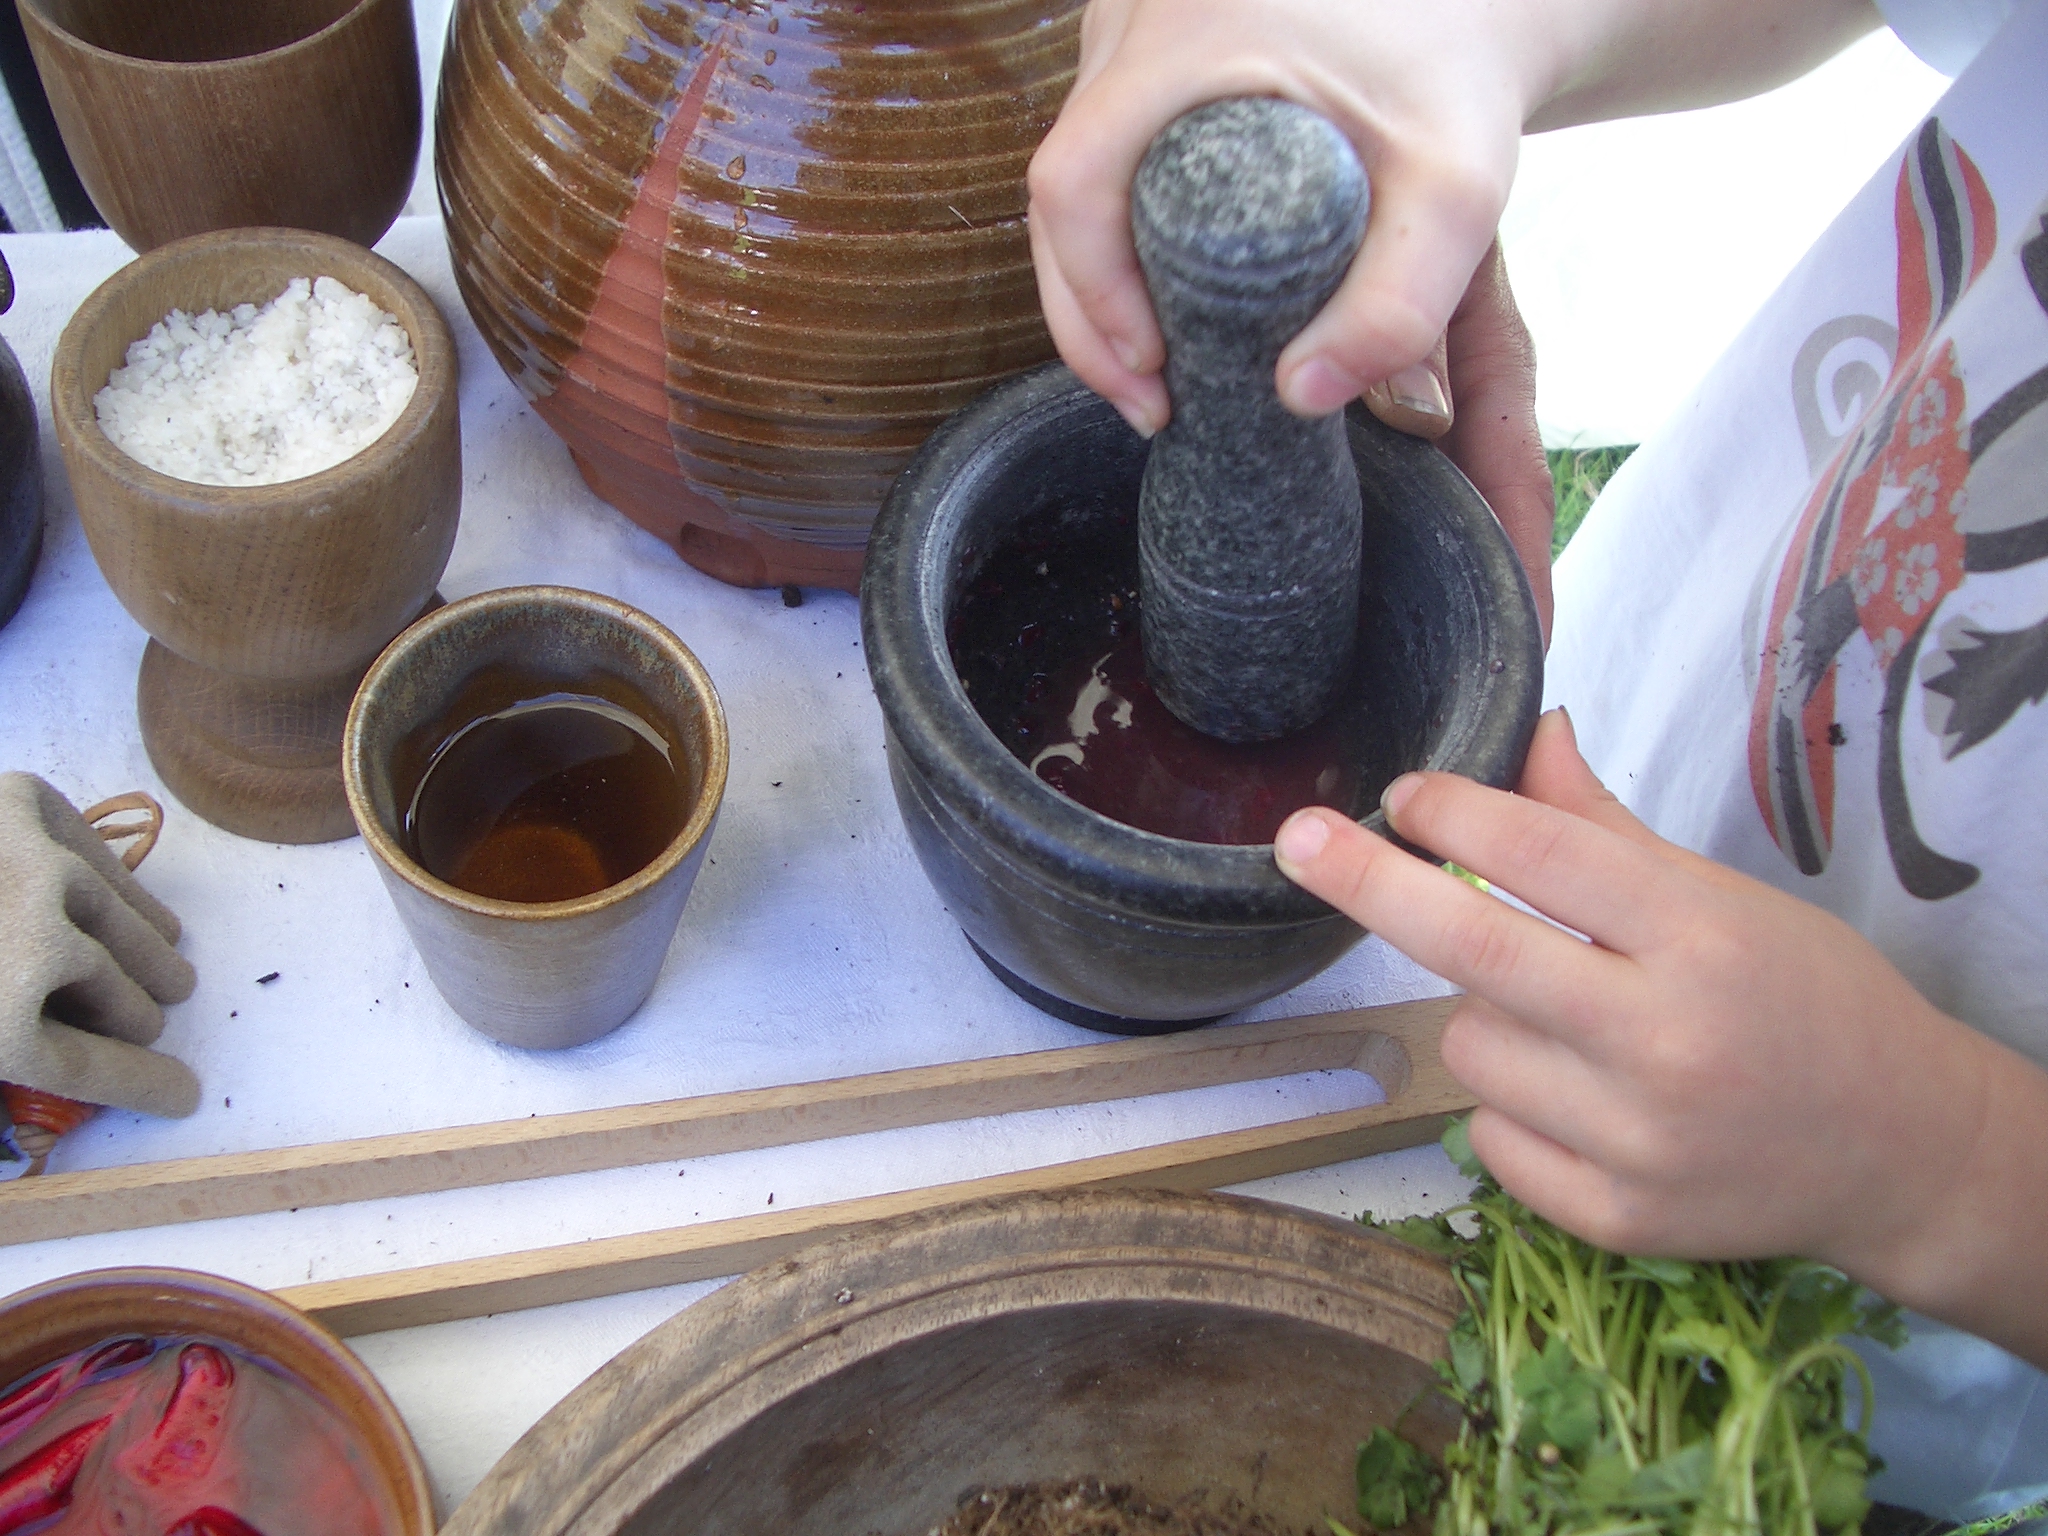 And tried their hand at grinding with a pestle and mortar